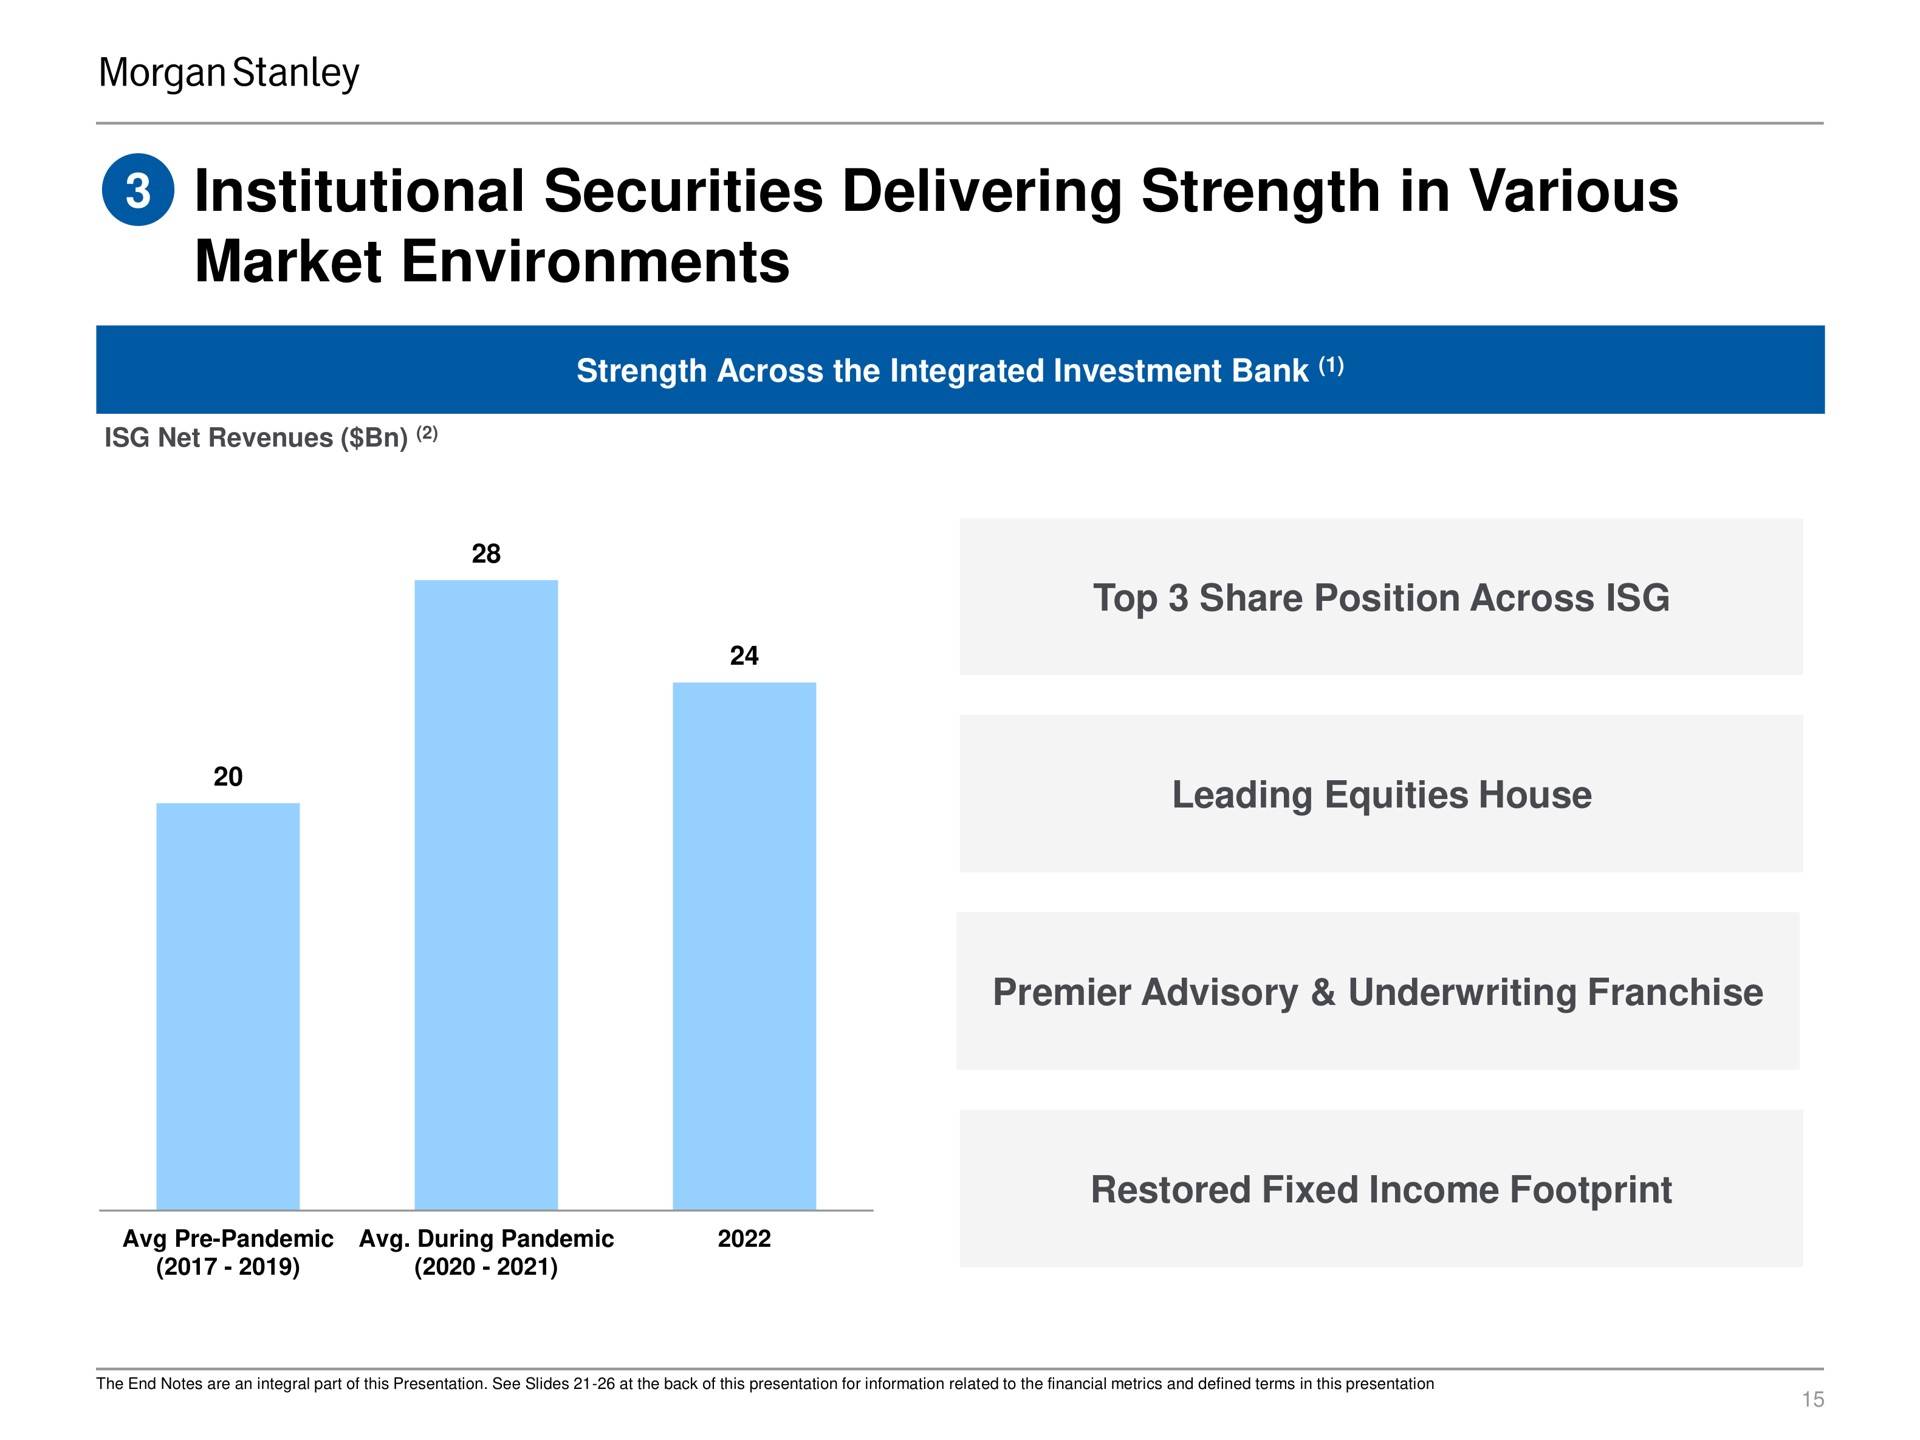 institutional securities delivering strength in various market environments | Morgan Stanley